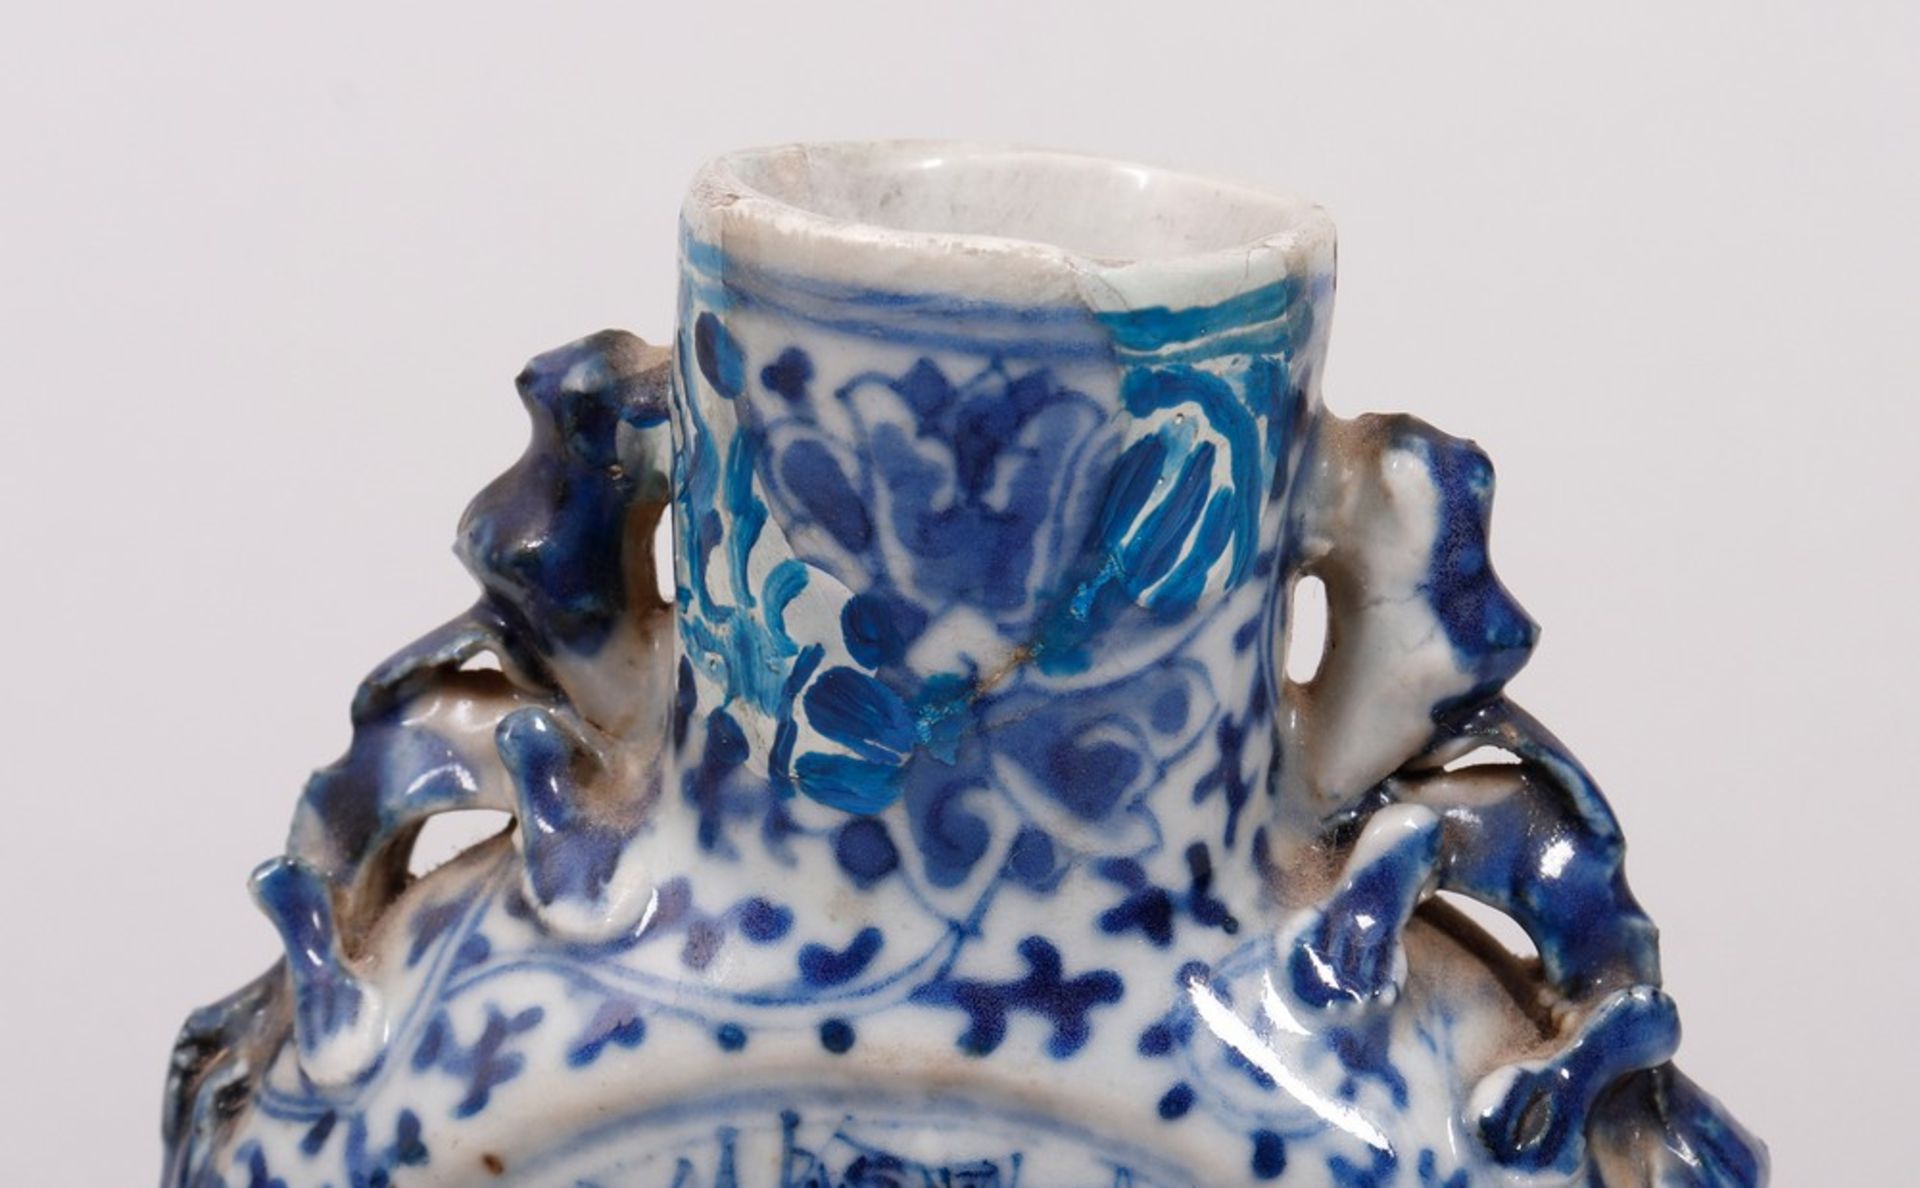 Small moon flask, China, Qing period (1644-1911), c. 1900 - Image 3 of 4